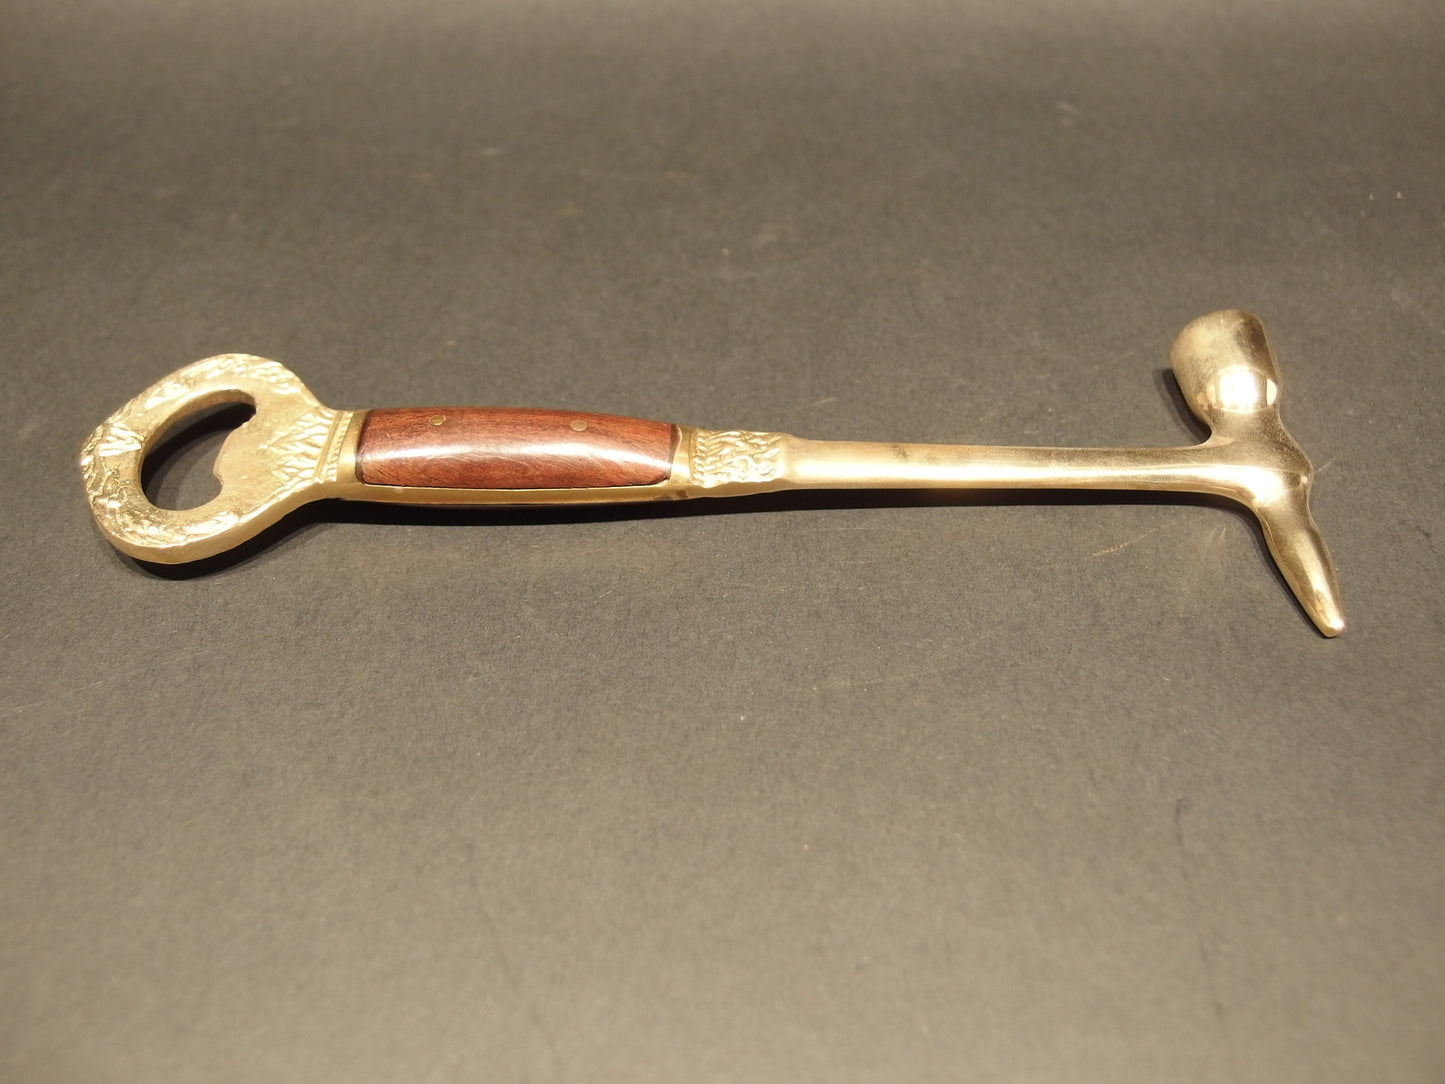 Antique Vintage Style Bottle Cap Opener w Ice Breaking Hammer & Pick - Early Home Decor